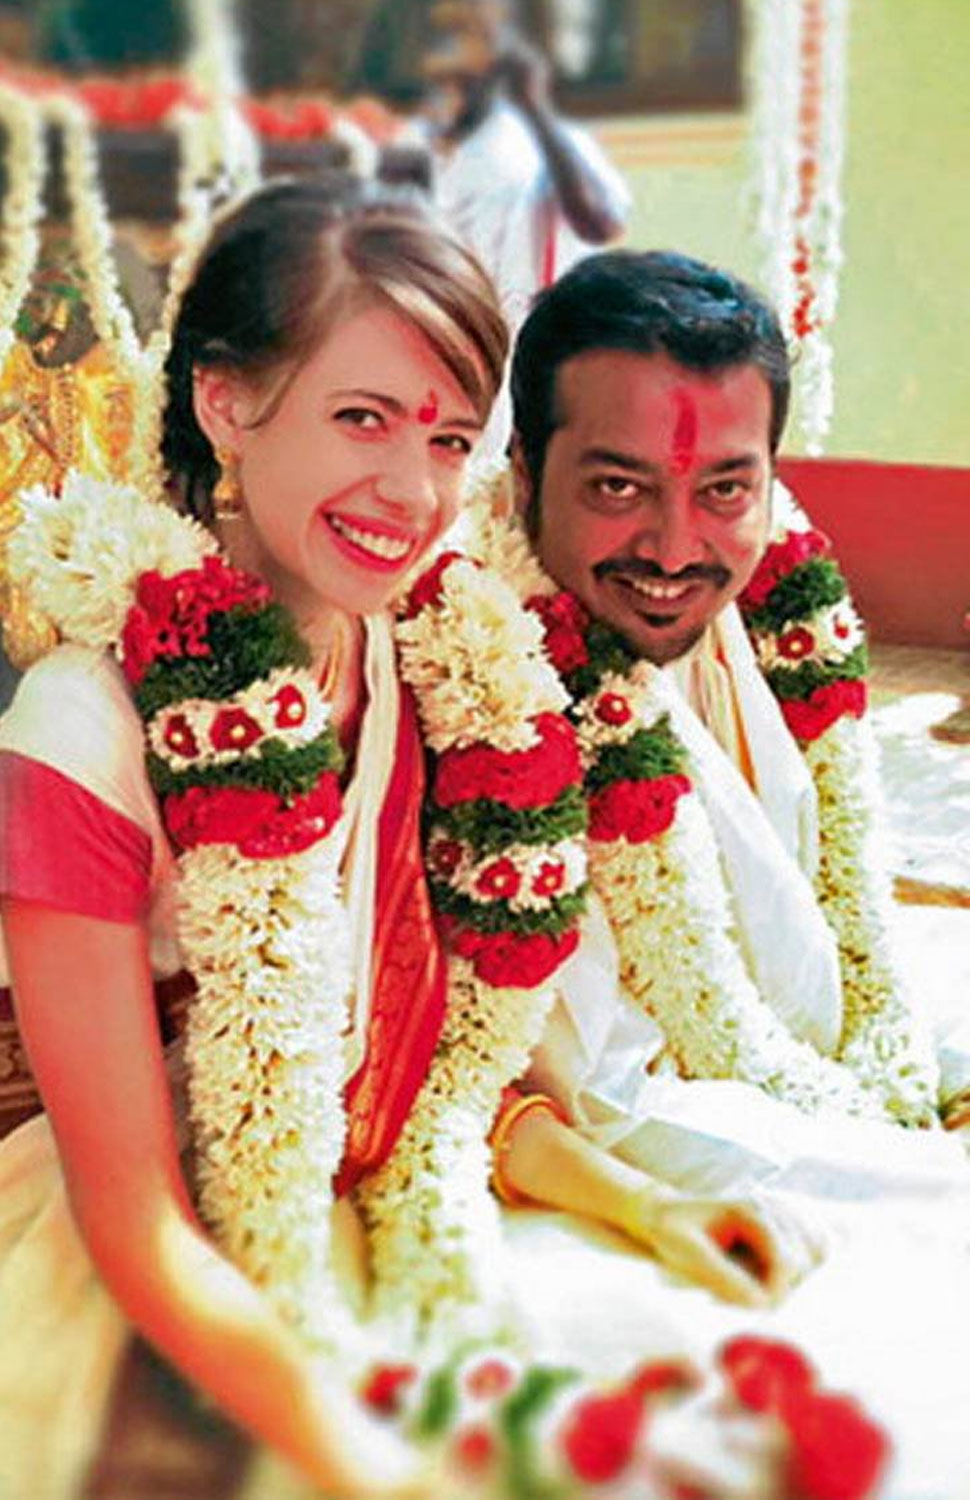 Photo: When Kalki Koechlin played mixed tapes with ex-husband Anurag Kashyap